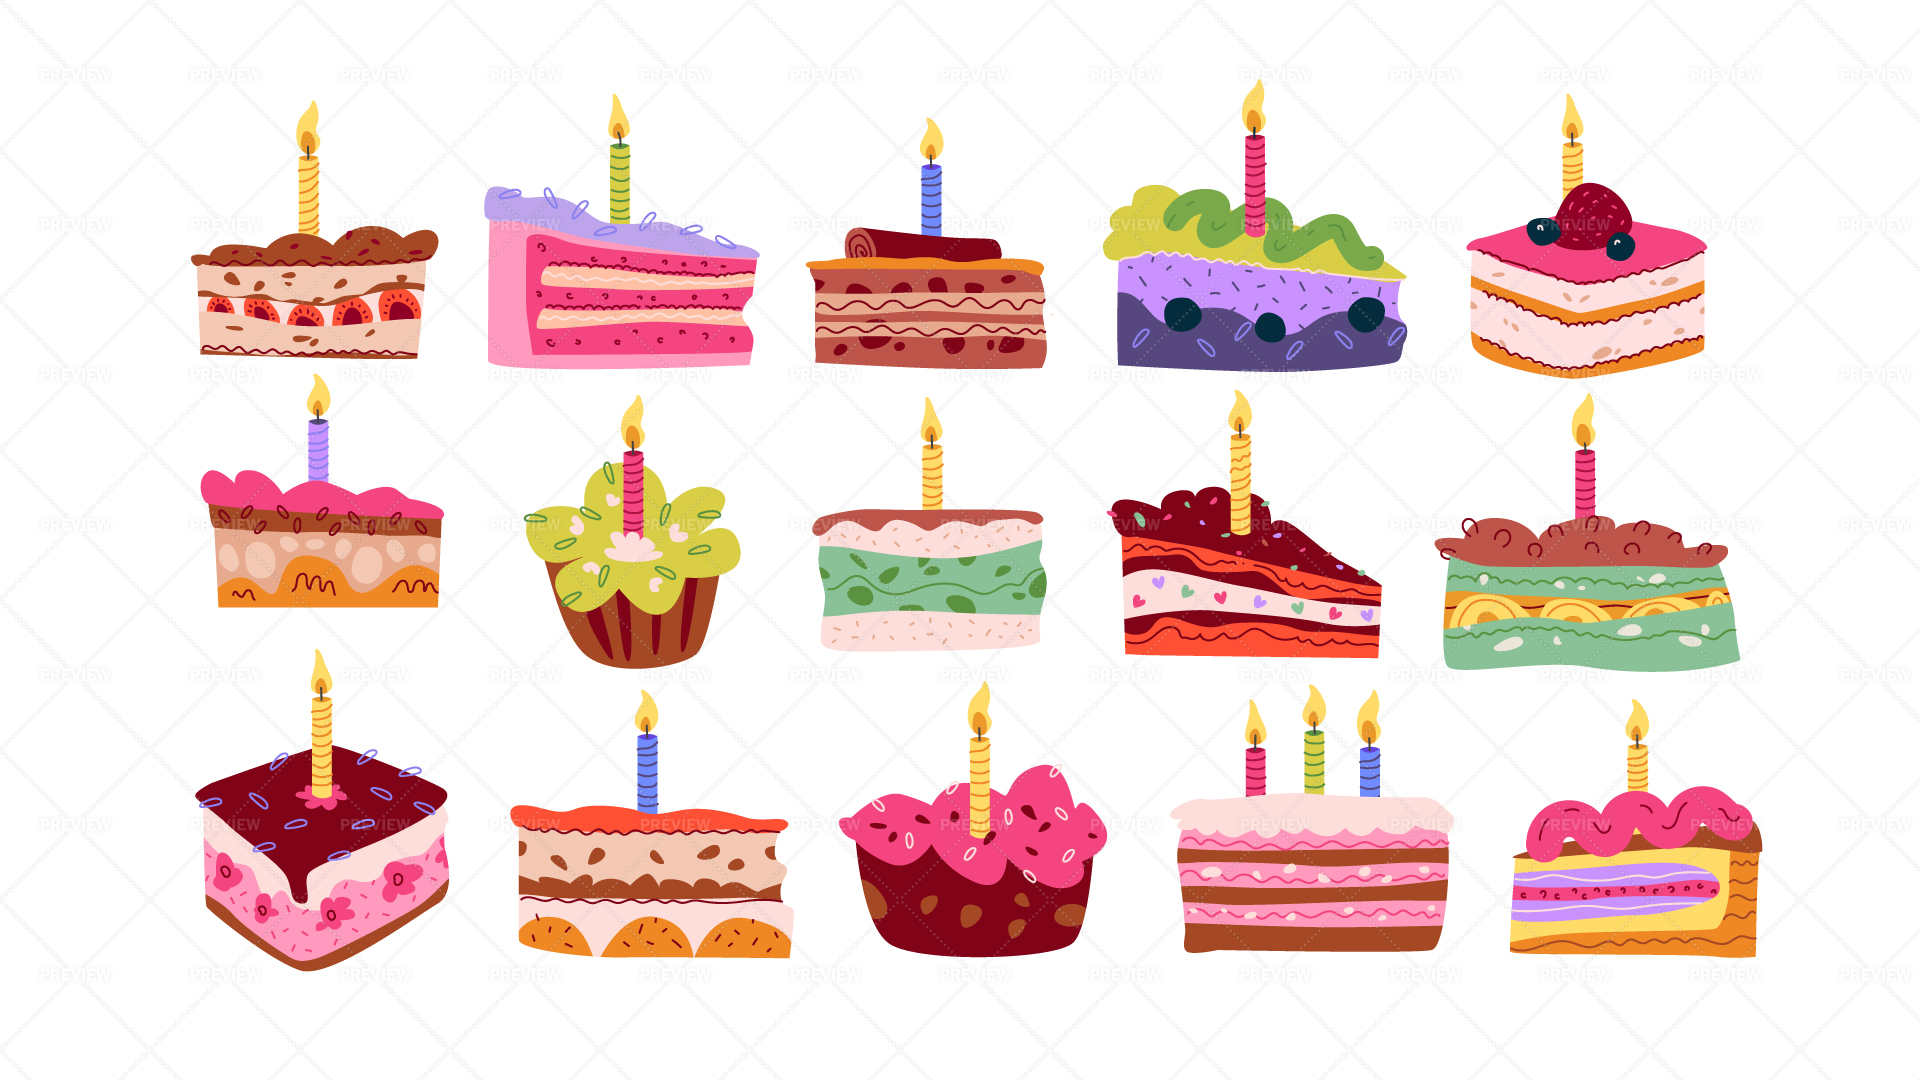 4,685 Array Cakes Images, Stock Photos & Vectors | Shutterstock